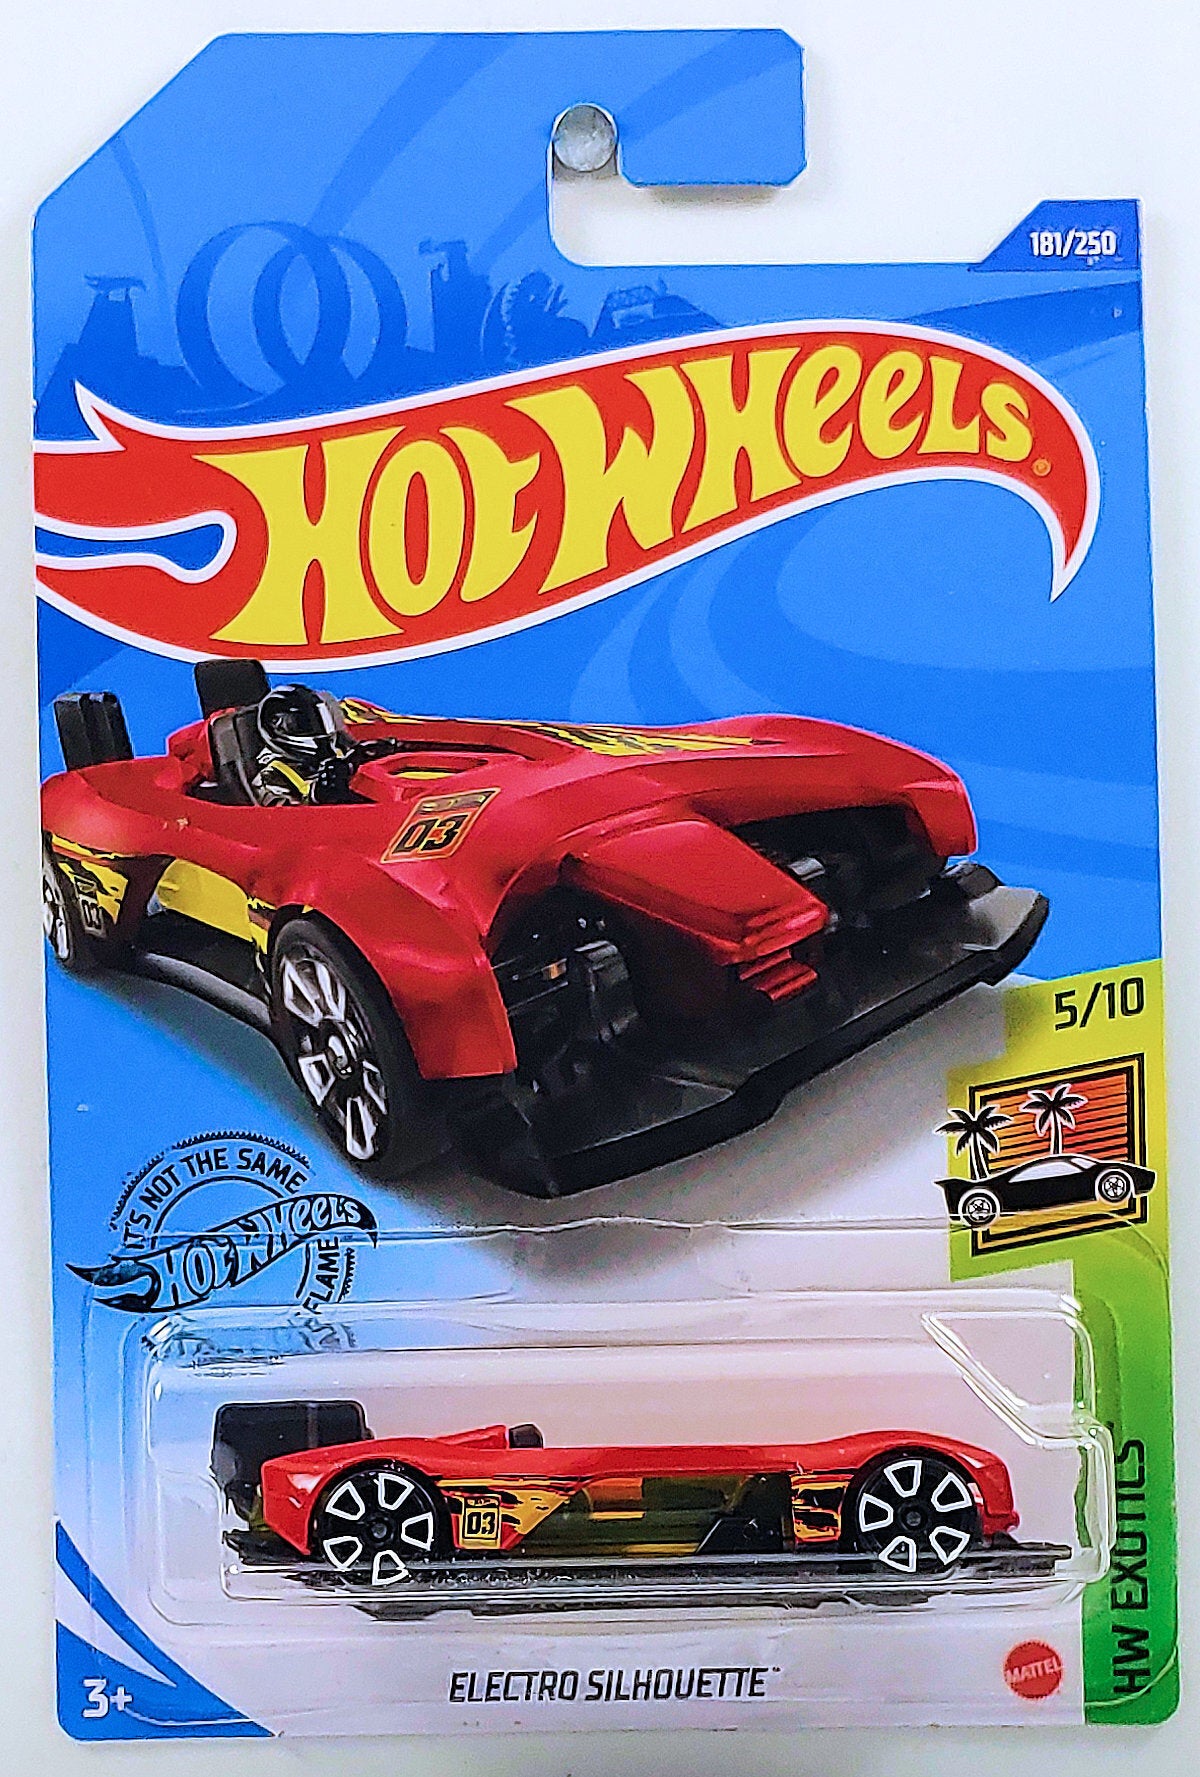 Hot Wheels 2020 - Collector # 181/250 - HW Exotics 5/10 - Electro Silhoutte - Red - IC